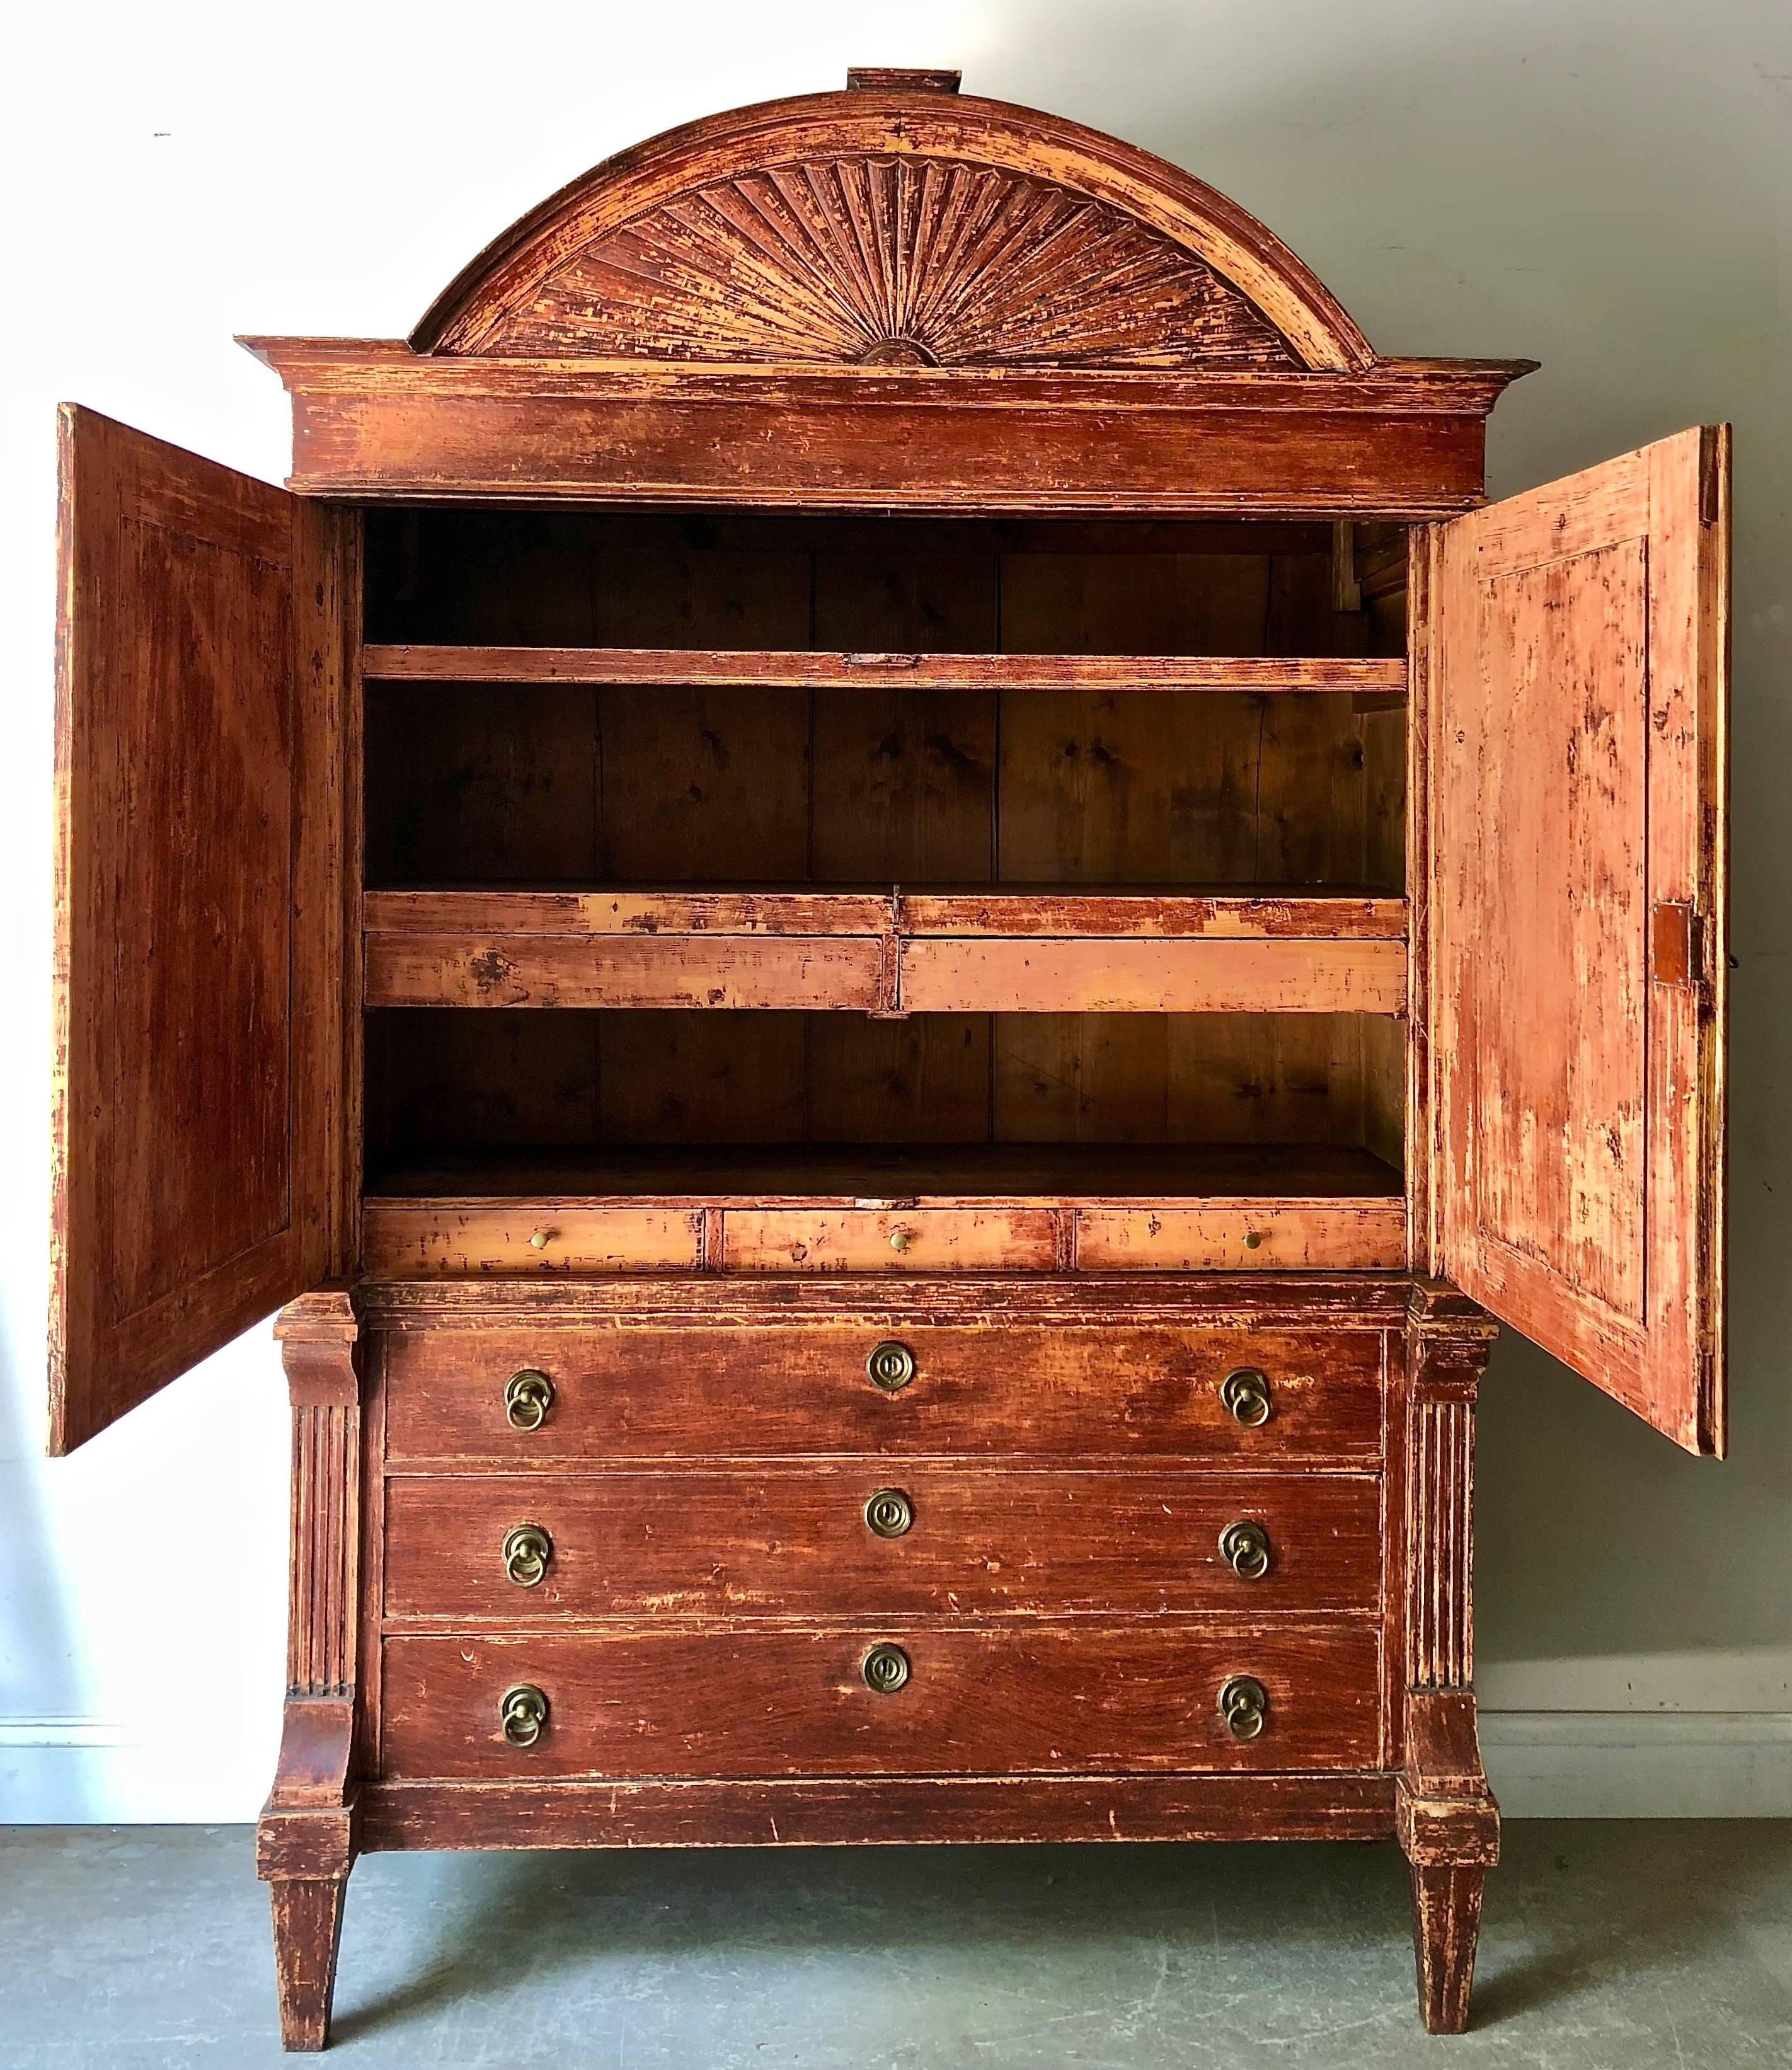 Hand-Carved 19th Century Dutch Cabinet